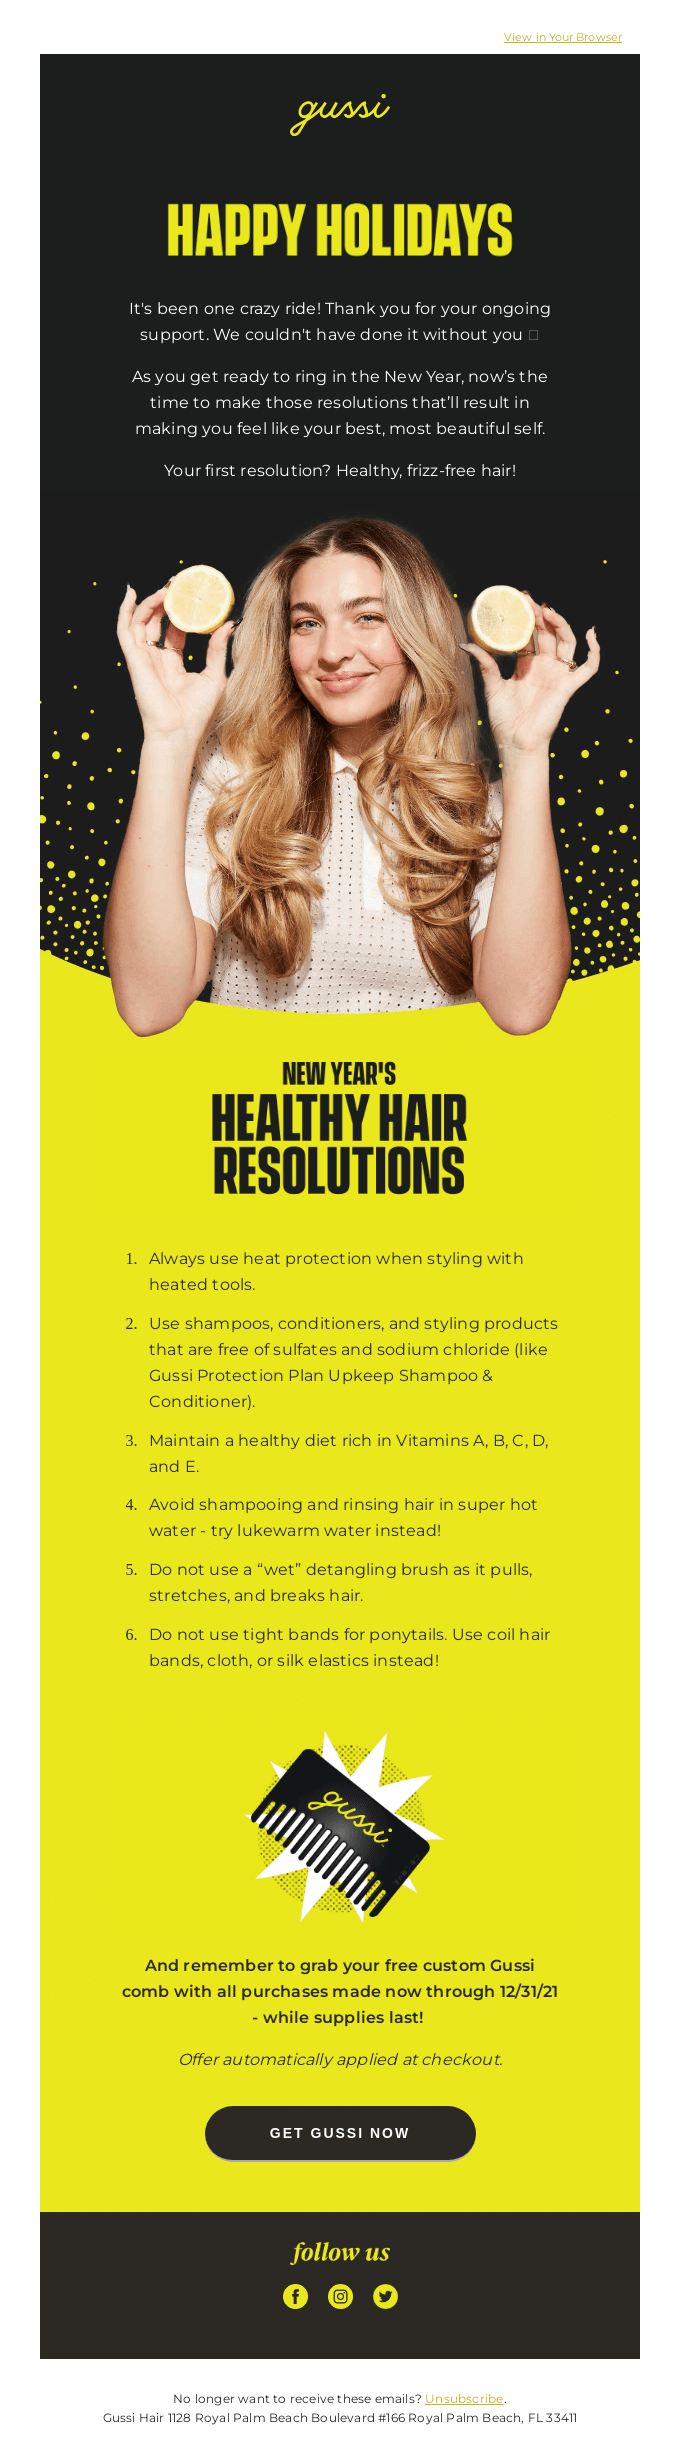 Ring the New Year With These Healthy Hair Resolutions